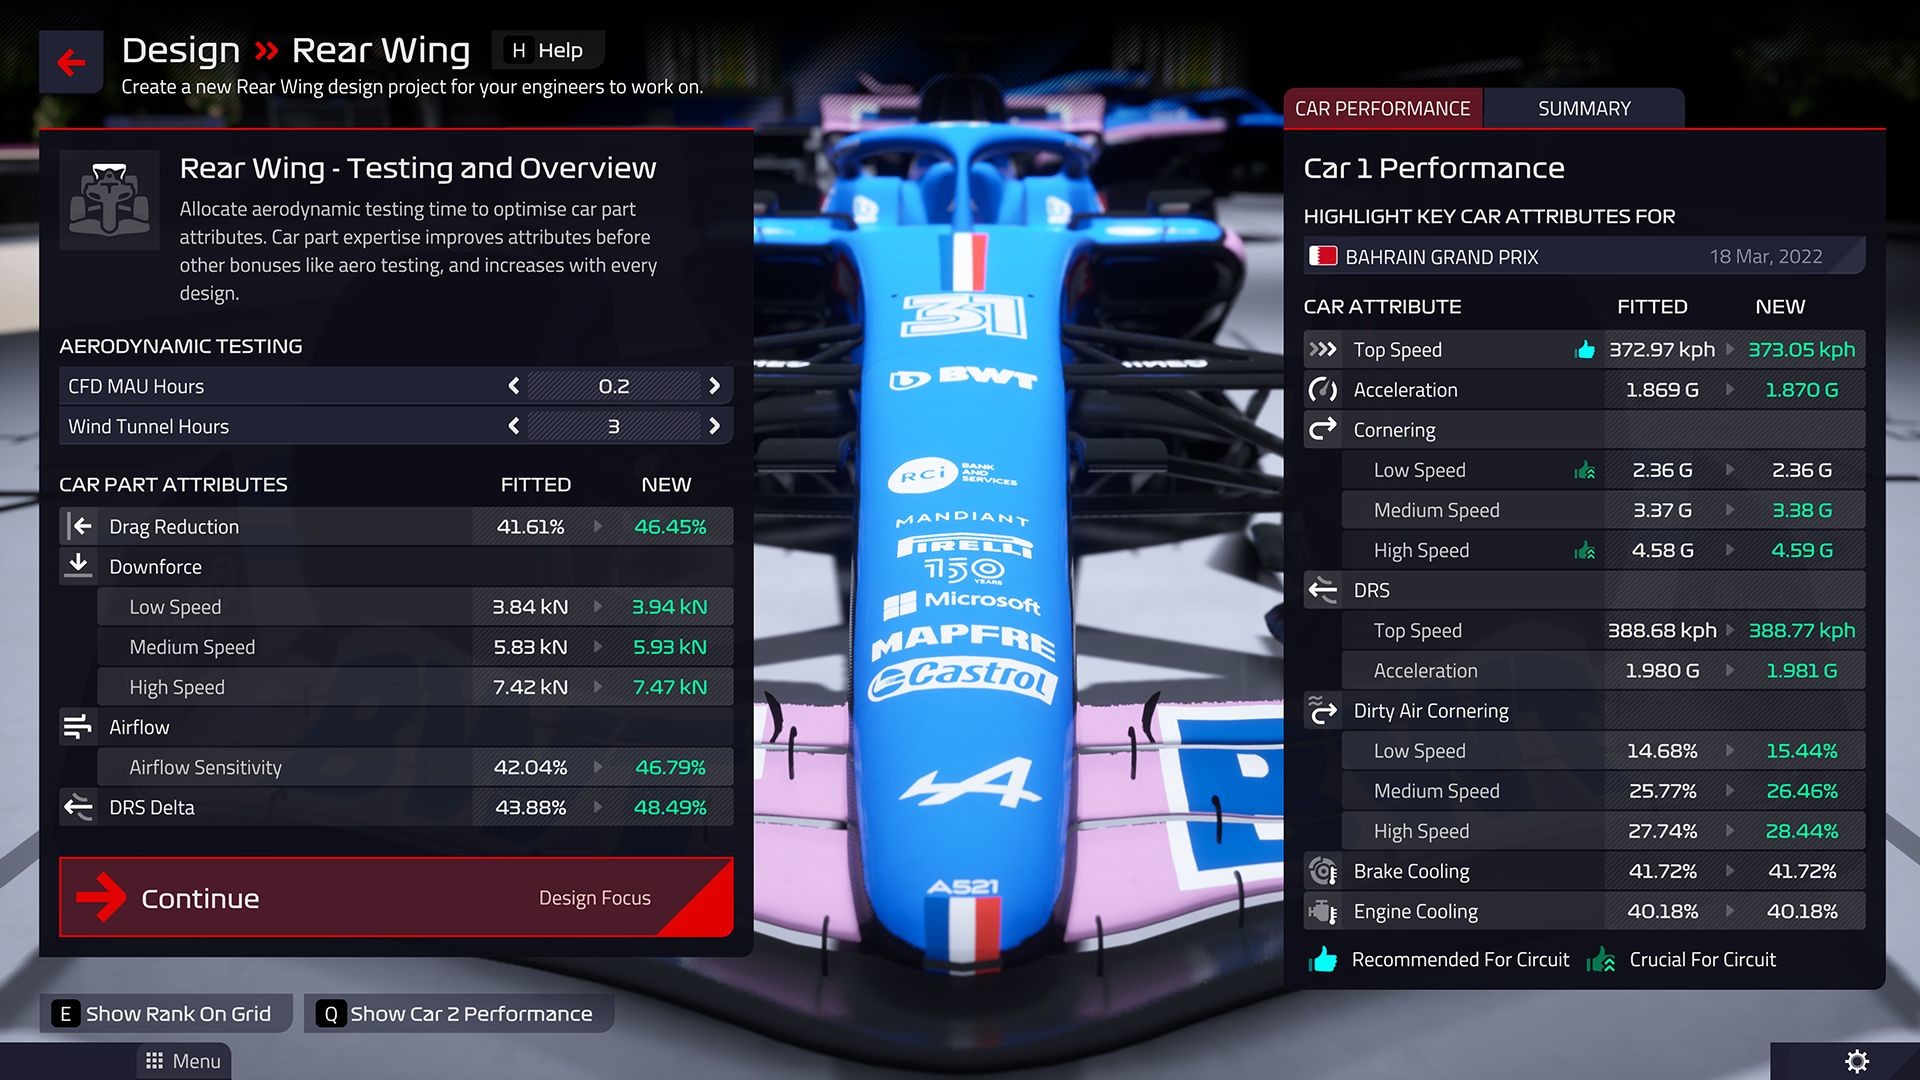 F1 Manager 2022 Bahrain Testing Results : r/F1Manager